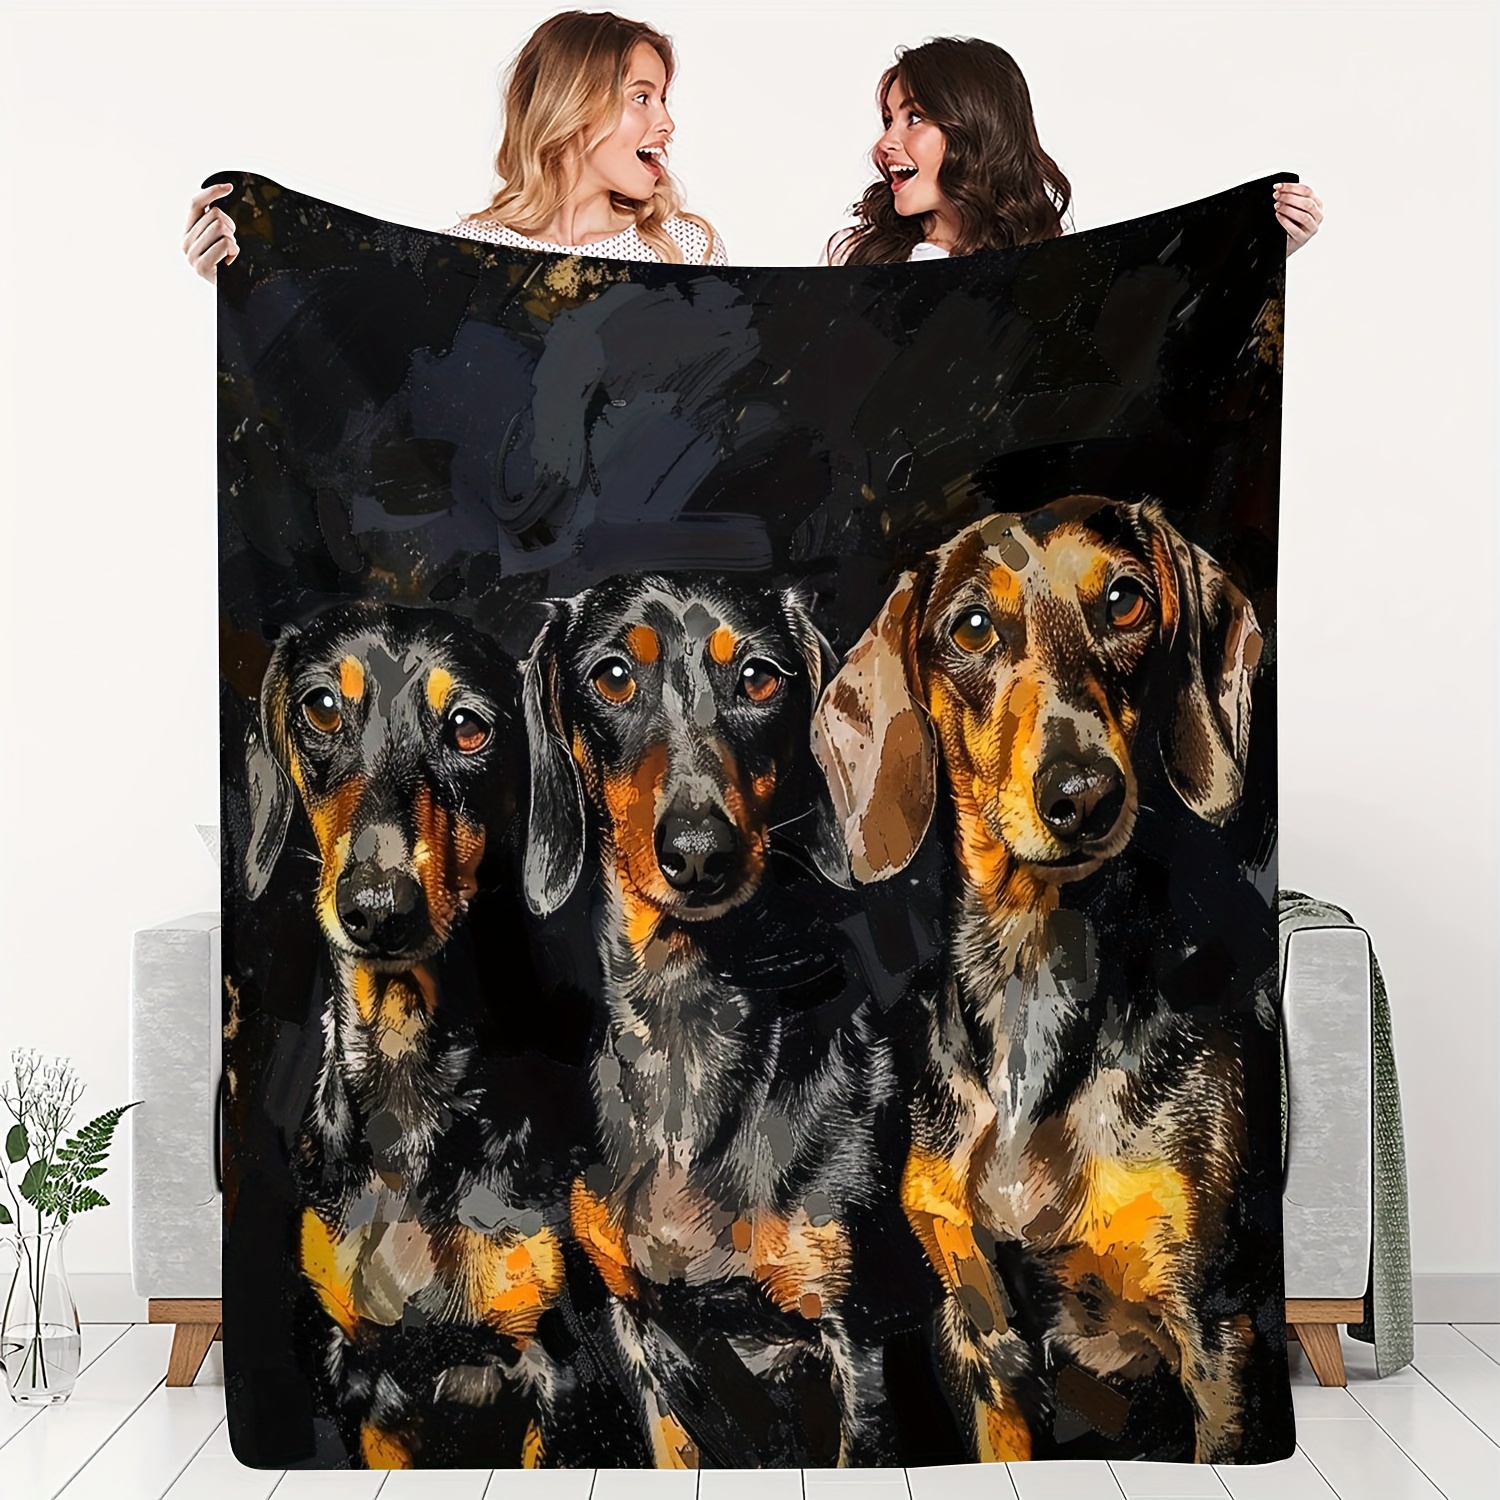 

1pc Dachshund Dog Printed Blanket Animal Fans Dog Lovers Blanket Soft Flannel Sofa Blanket For Couch Office Bed Camping Travel For All Seasons Universal